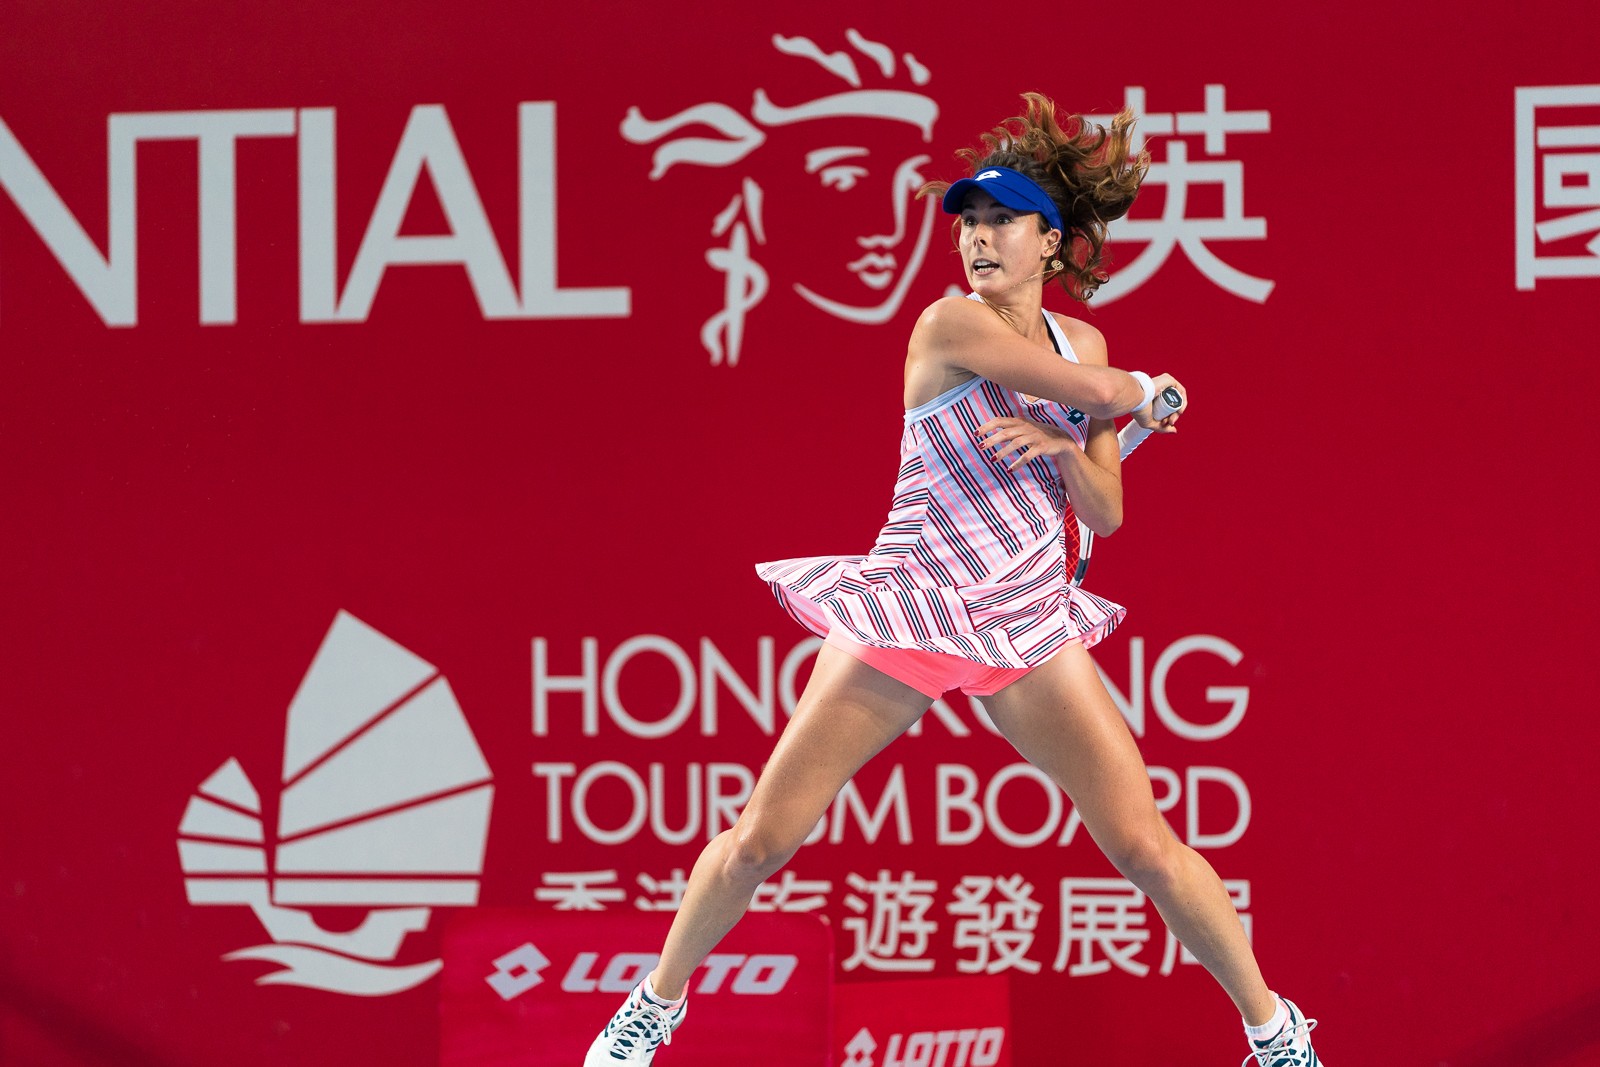 Alize Cornet returns the ball at the Prudential Hong Kong Tennis Open at Victoria Park Tennis Stadium in Causeway Bay. Photo: Andy Cheung/Hong Kong Tennis Open/ArcK Photography